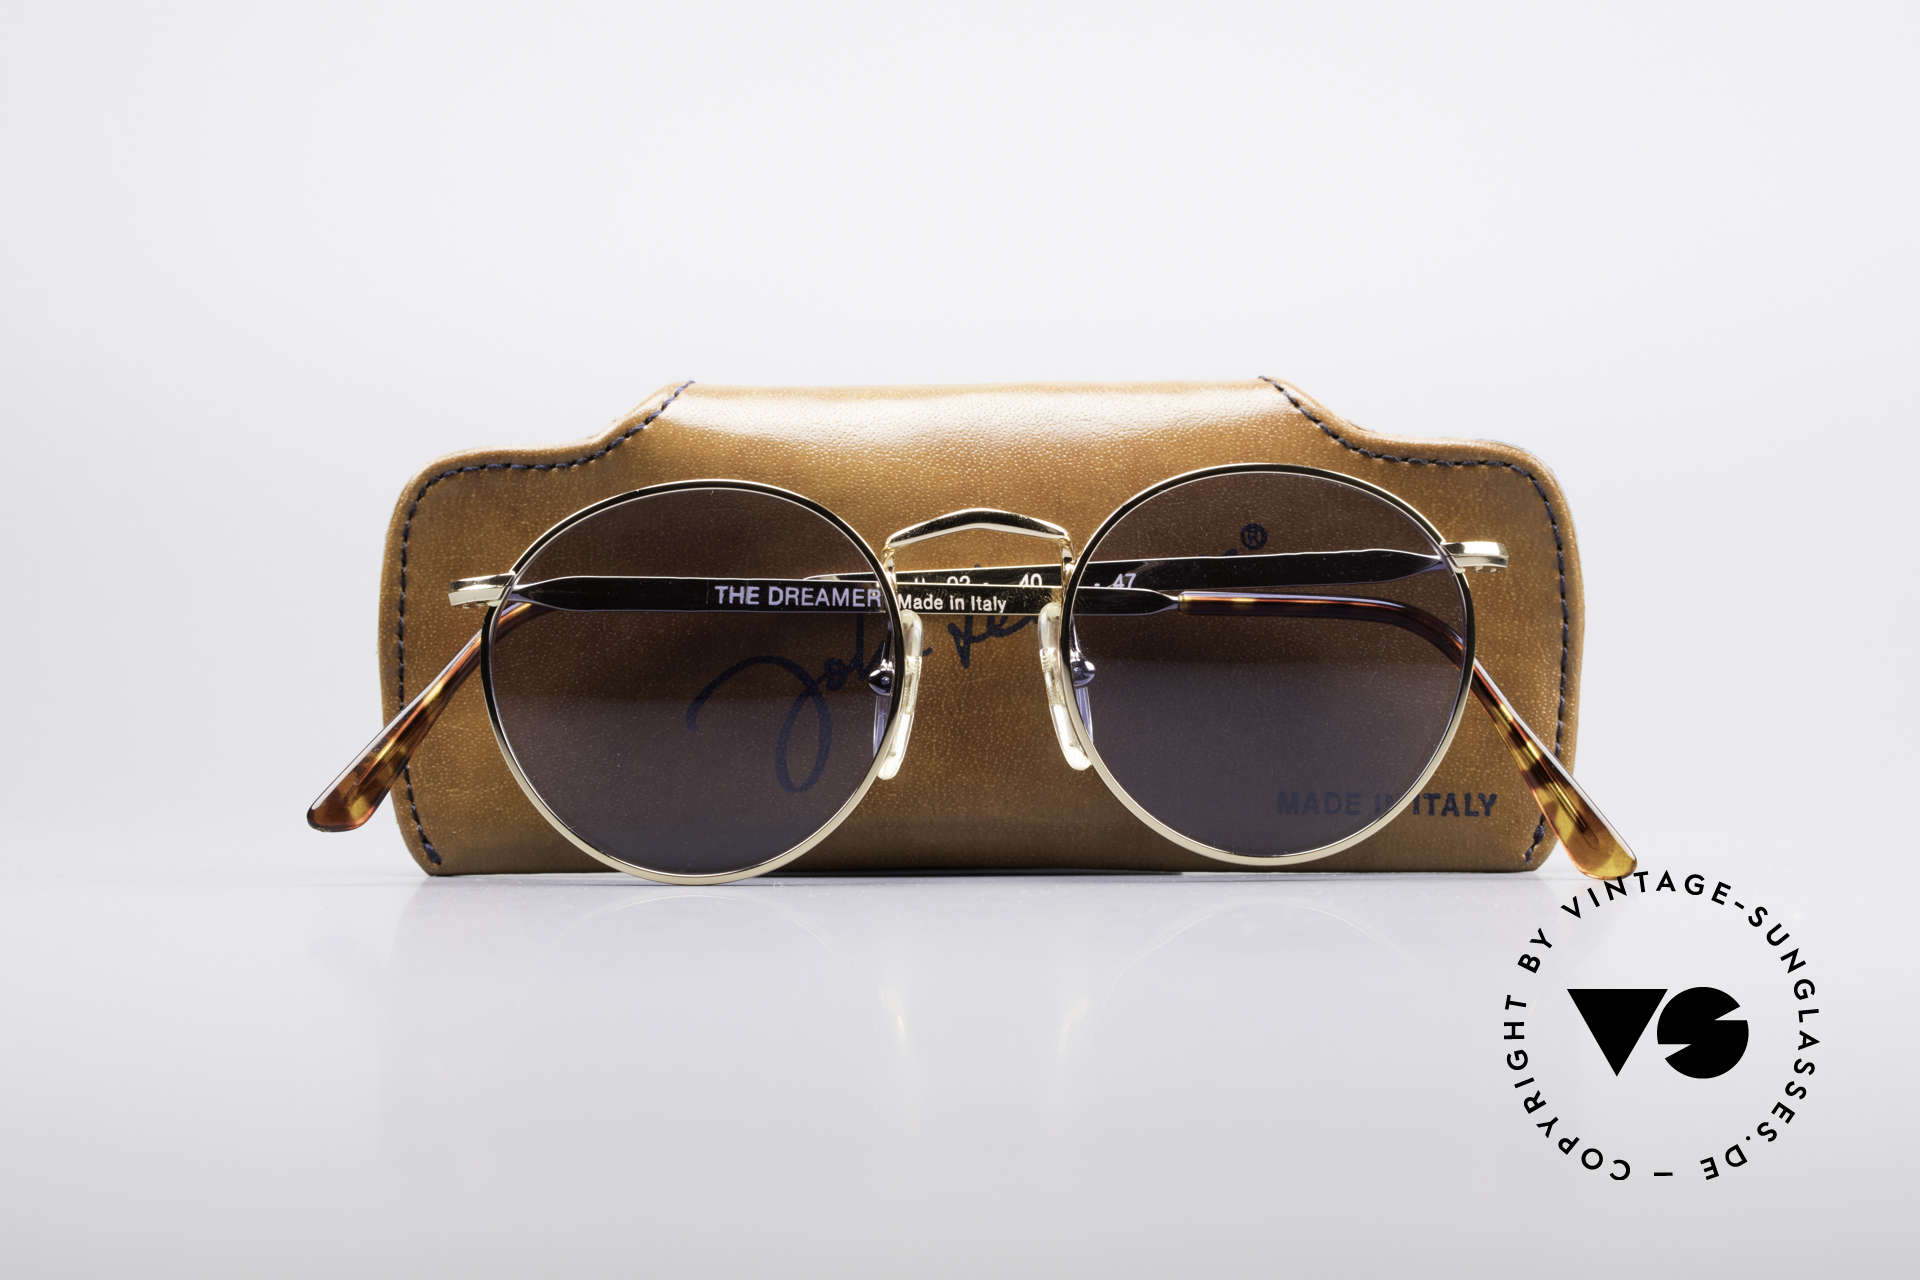 Exclusief Komkommer Wens Sunglasses John Lennon - The Dreamer Extra Small Vintage Shades